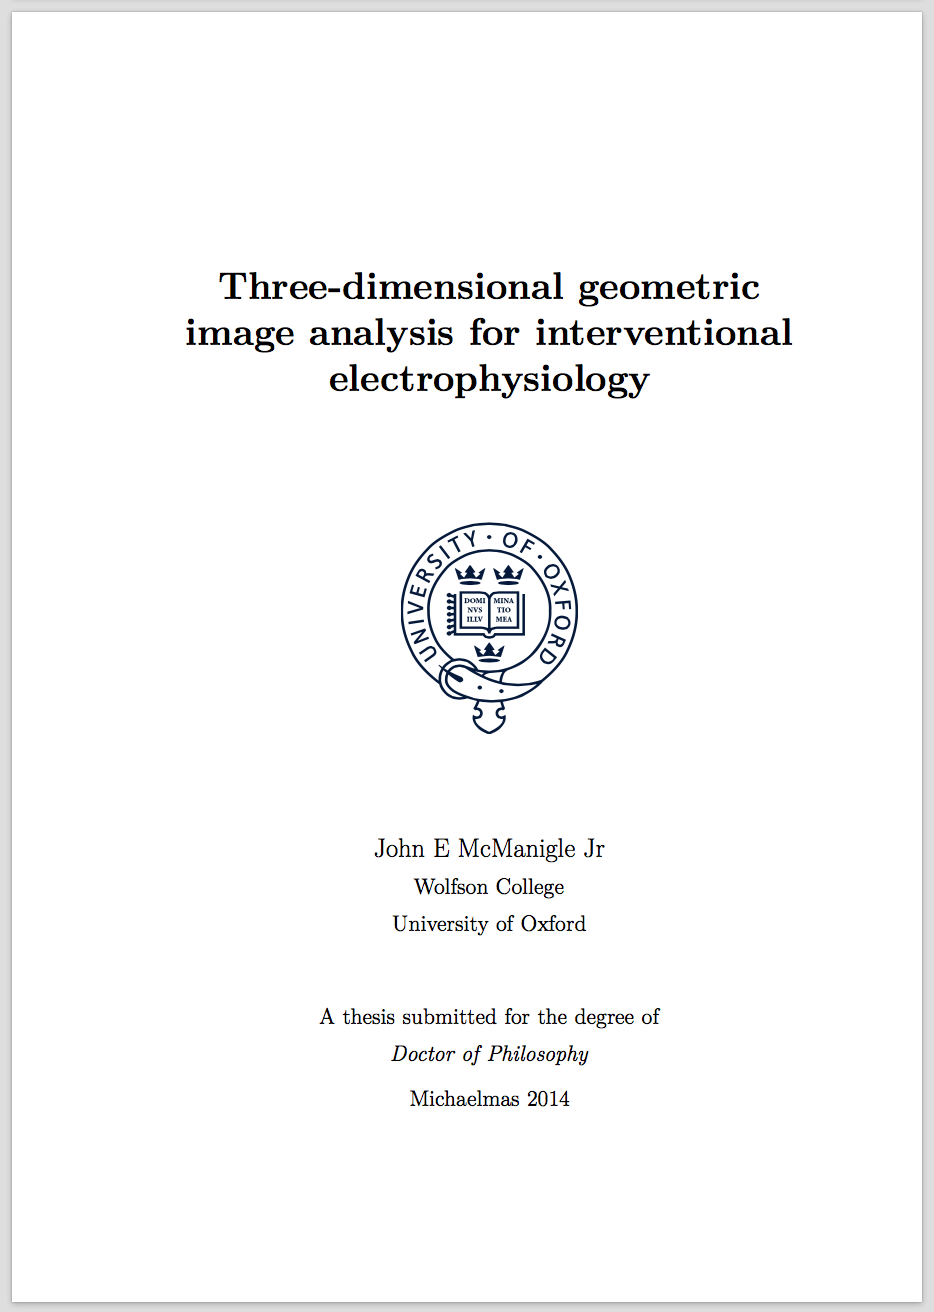 cover page of phd proposal